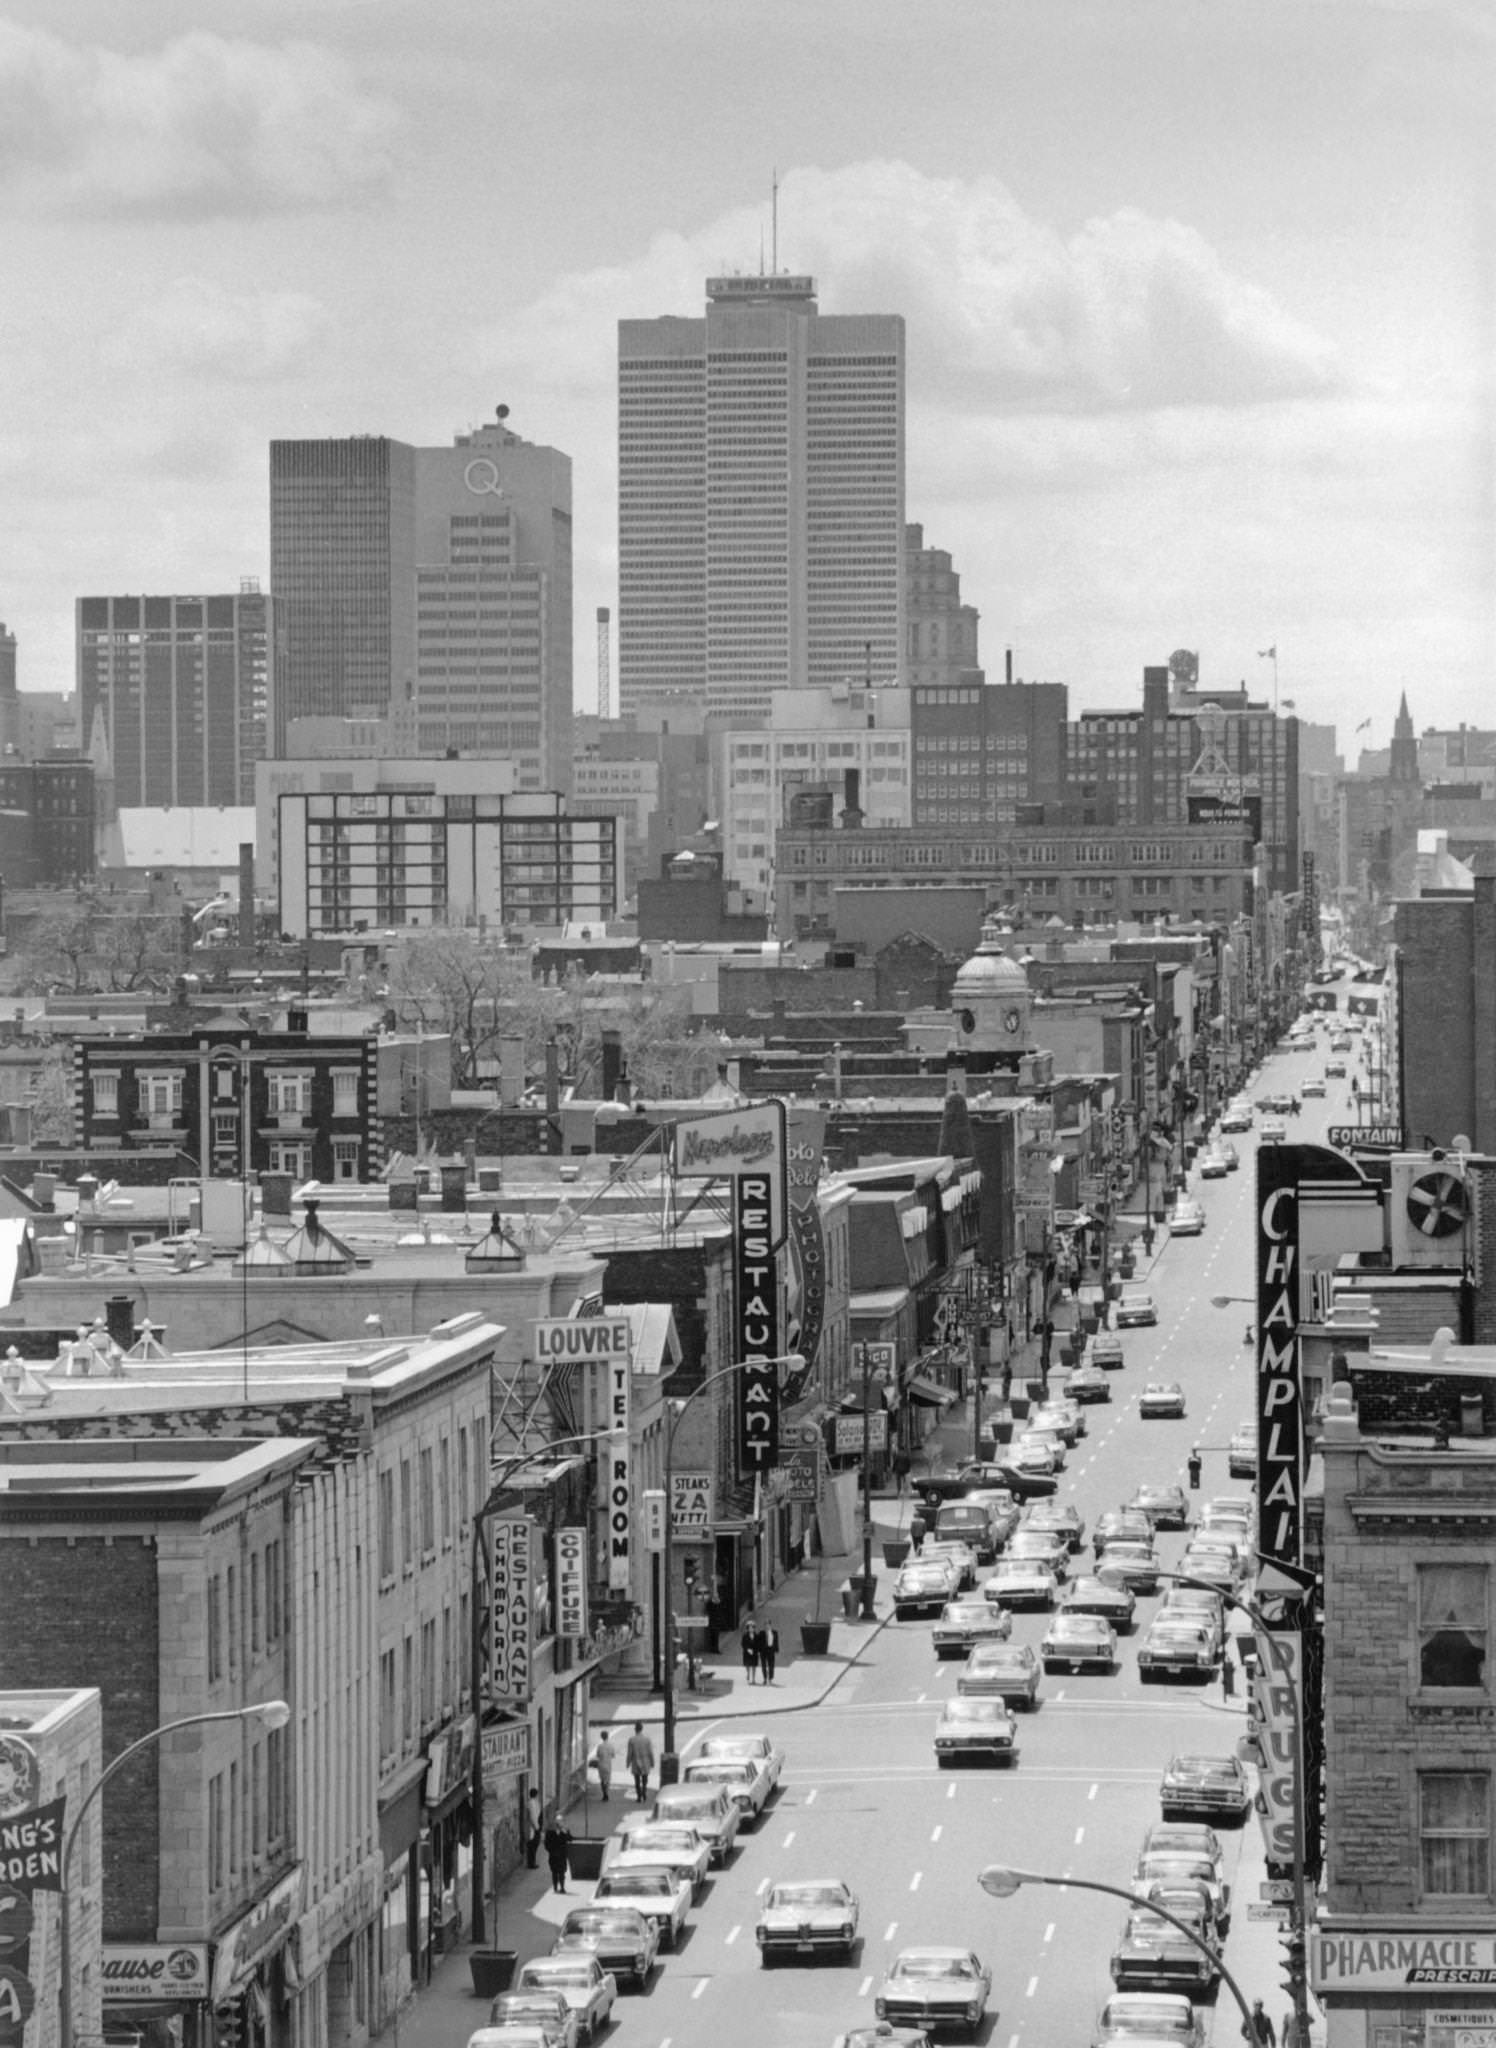 View from suburb to city center, Montreal, 1960s